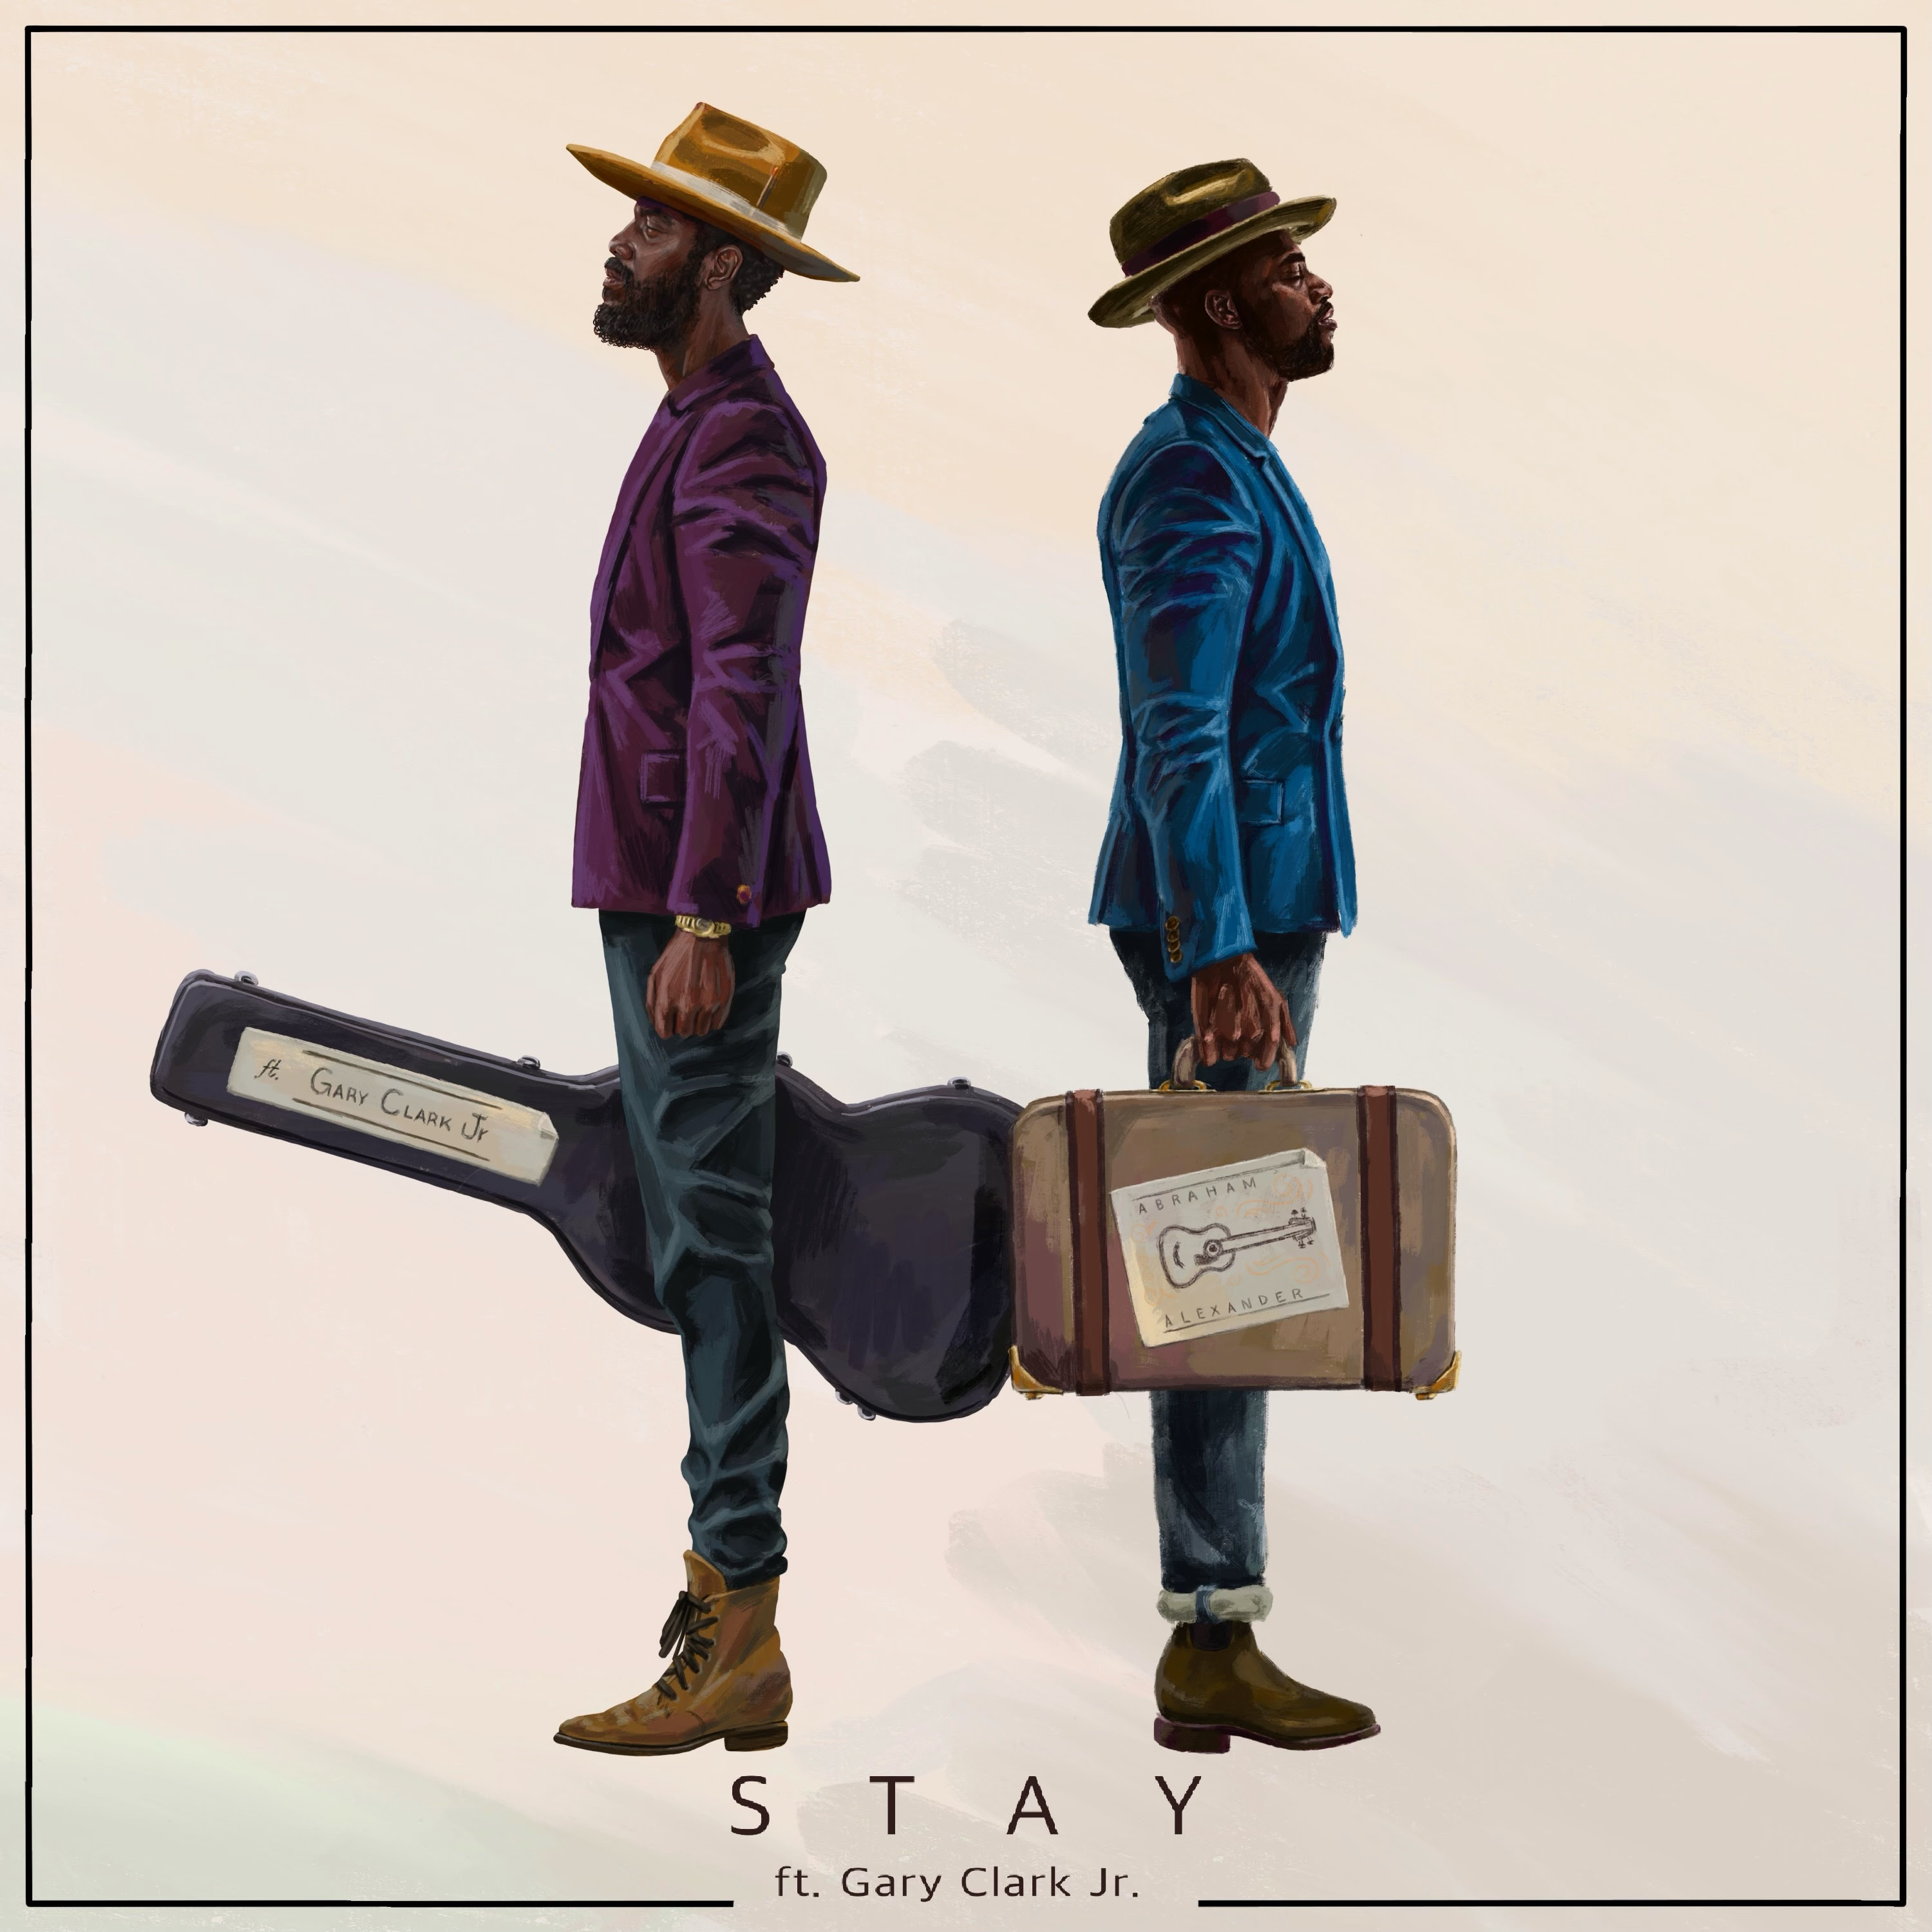 Abraham Alexander Releases “Stay” featuring Gary Clark Jr.